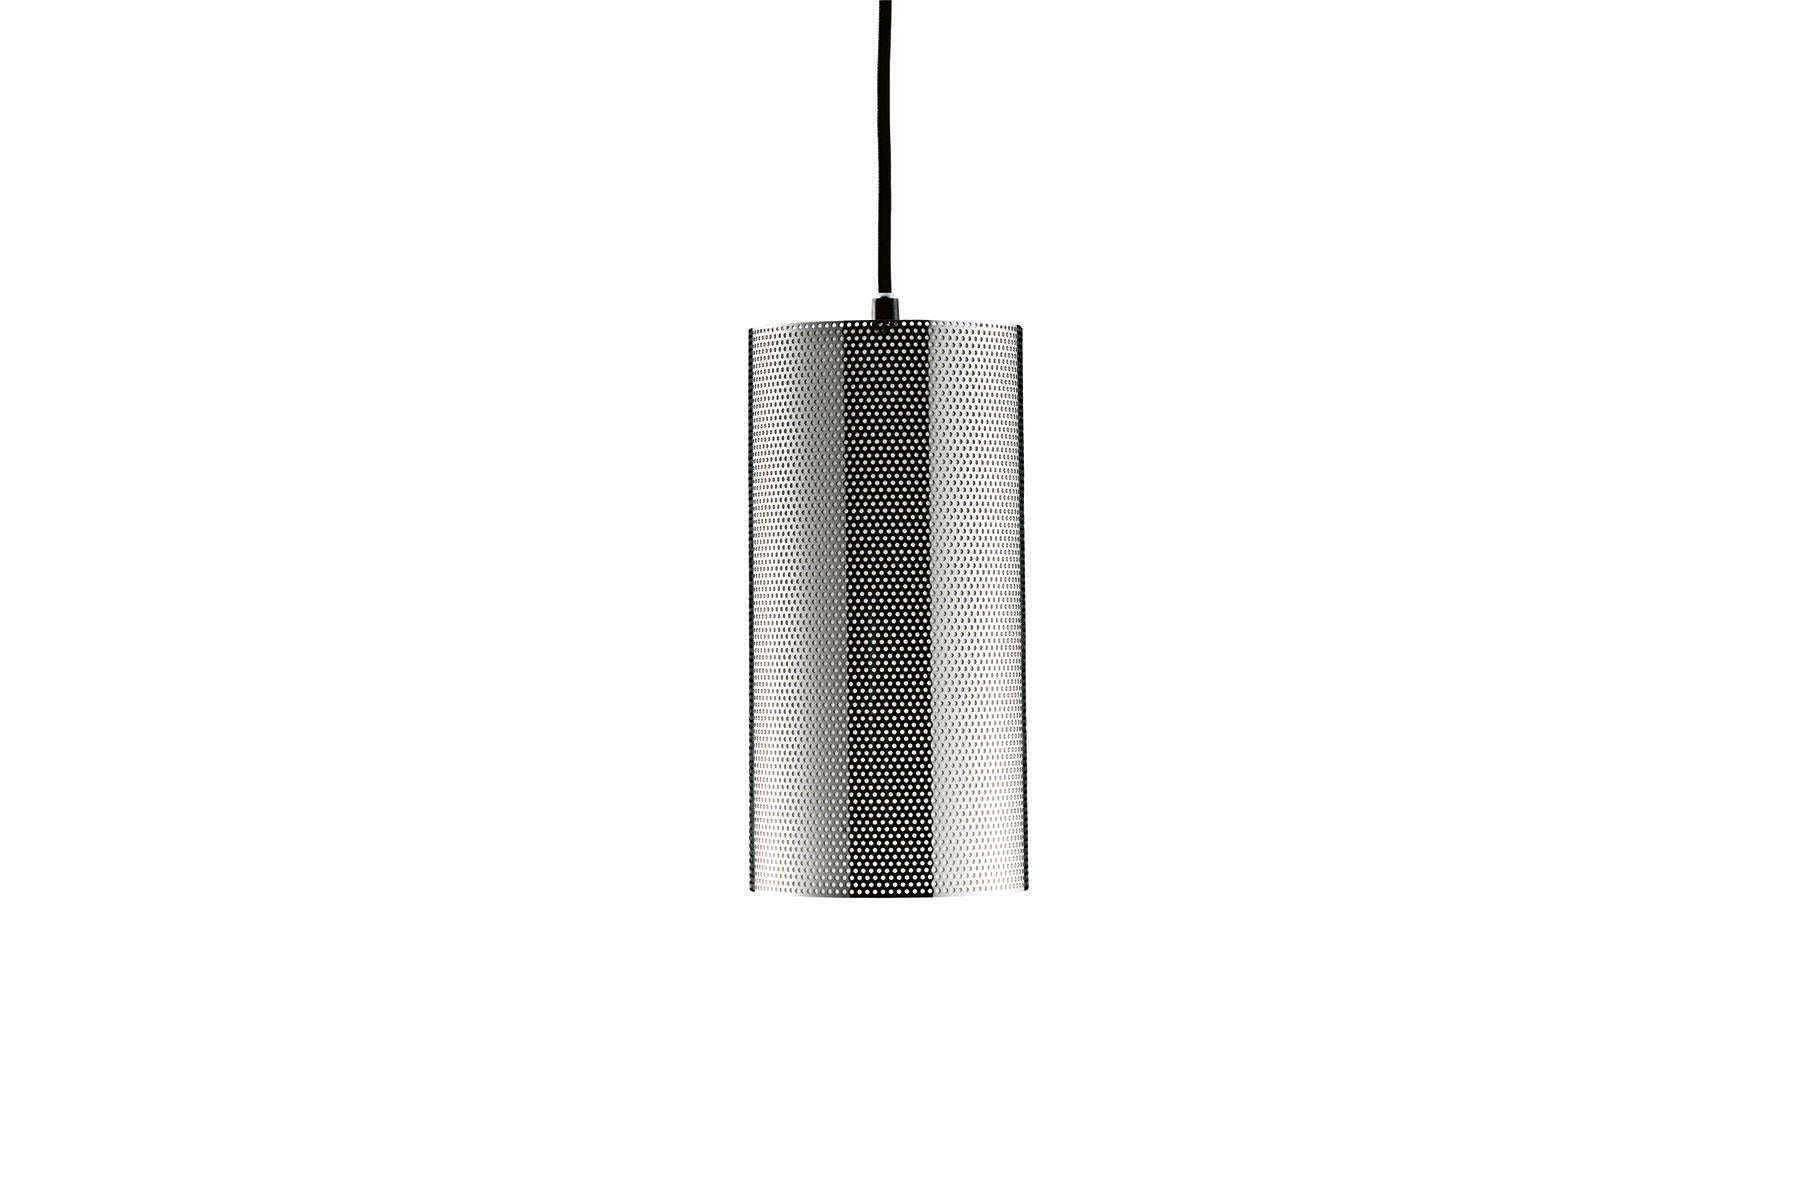 The H2O pendant is designed by Barba Corsini in collaboration with Joaquim Ruiz Millet as an evolution of the original PD2 Floor Lamp. Taking the perforations that feature on the original design as inspiration for the H2O Pendant, it exudes a warm